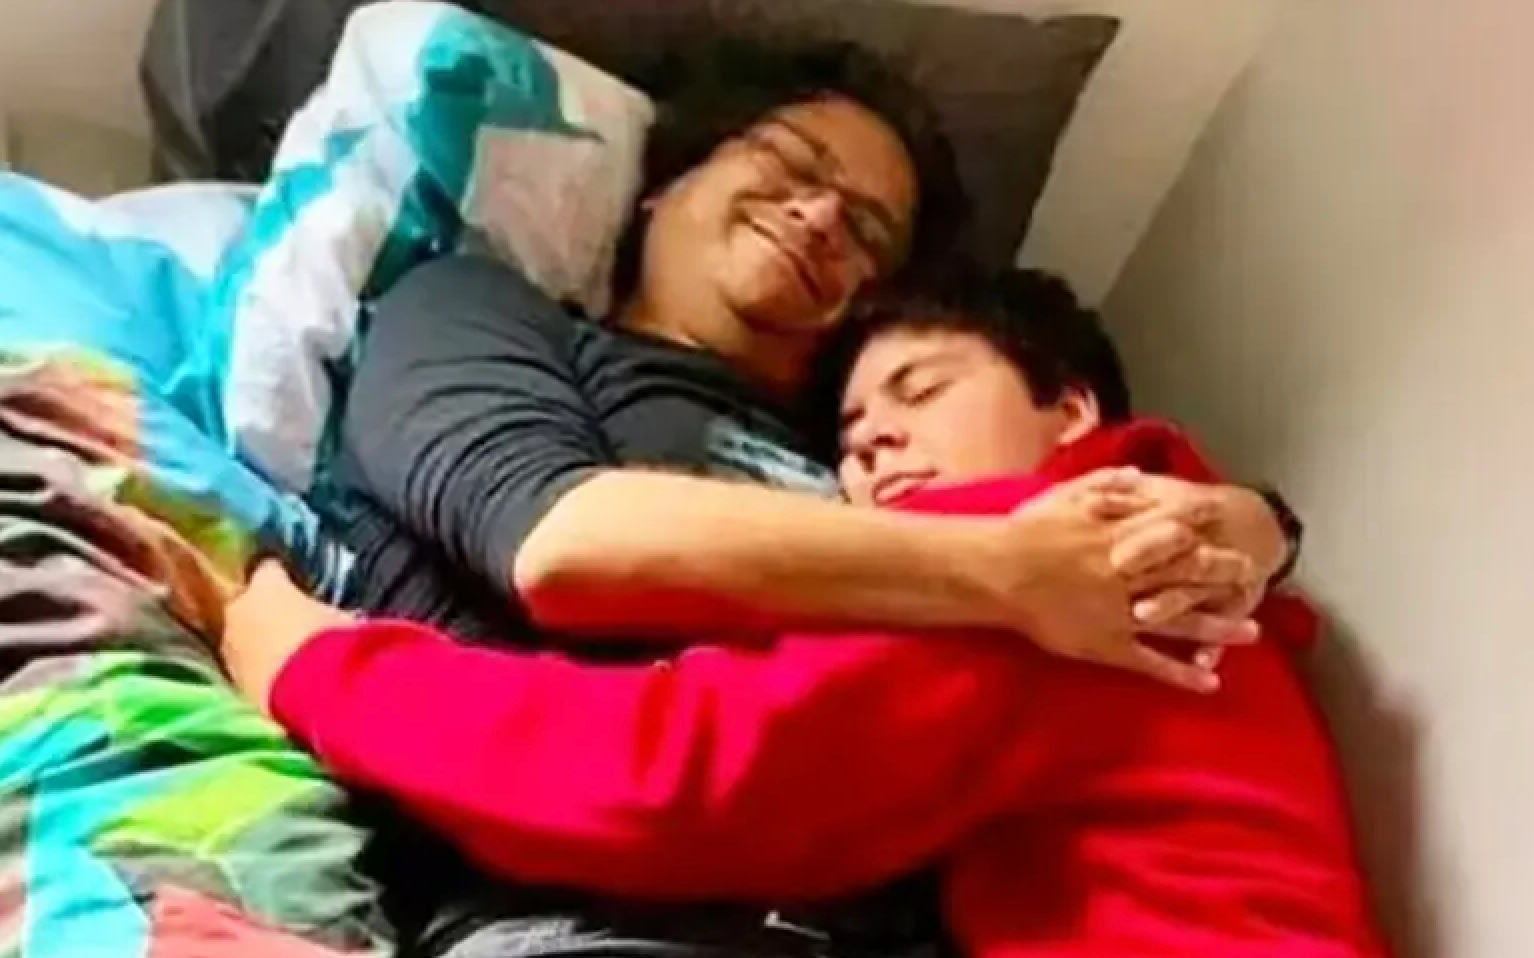 Shahzada Dawood, 58, and 19-year-old son Suleman share a tender hug before their doomed deep sea trip on the Titan submersible